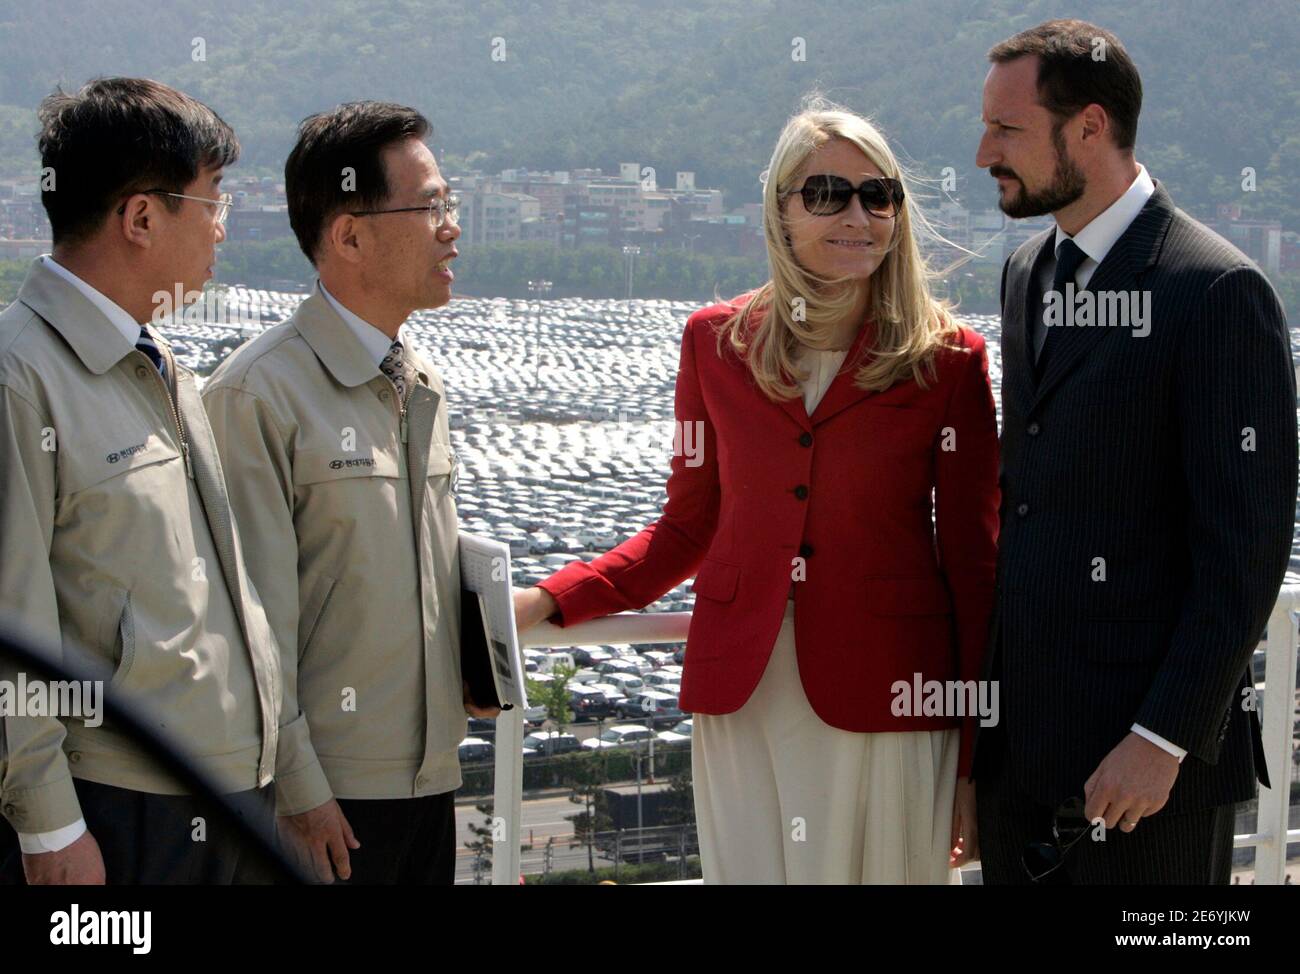 Norwegian Crown Prince Haakon (R) and Crown Princess Mette-Marit (2nd R) visit one of the ships owned by Wilh. Wilhelmsen's Korean joint venture EUKOR, which handles all car exports from South Korea for Hyundai Motor Company and Kia Motors corporation, at Hyundai Motor's export port in Ulsan, about 410 km (256 miles) southeast of Seoul, May 11, 2007.  REUTERS/Jo Yong-Hak (SOUTH KOREA) Stock Photo